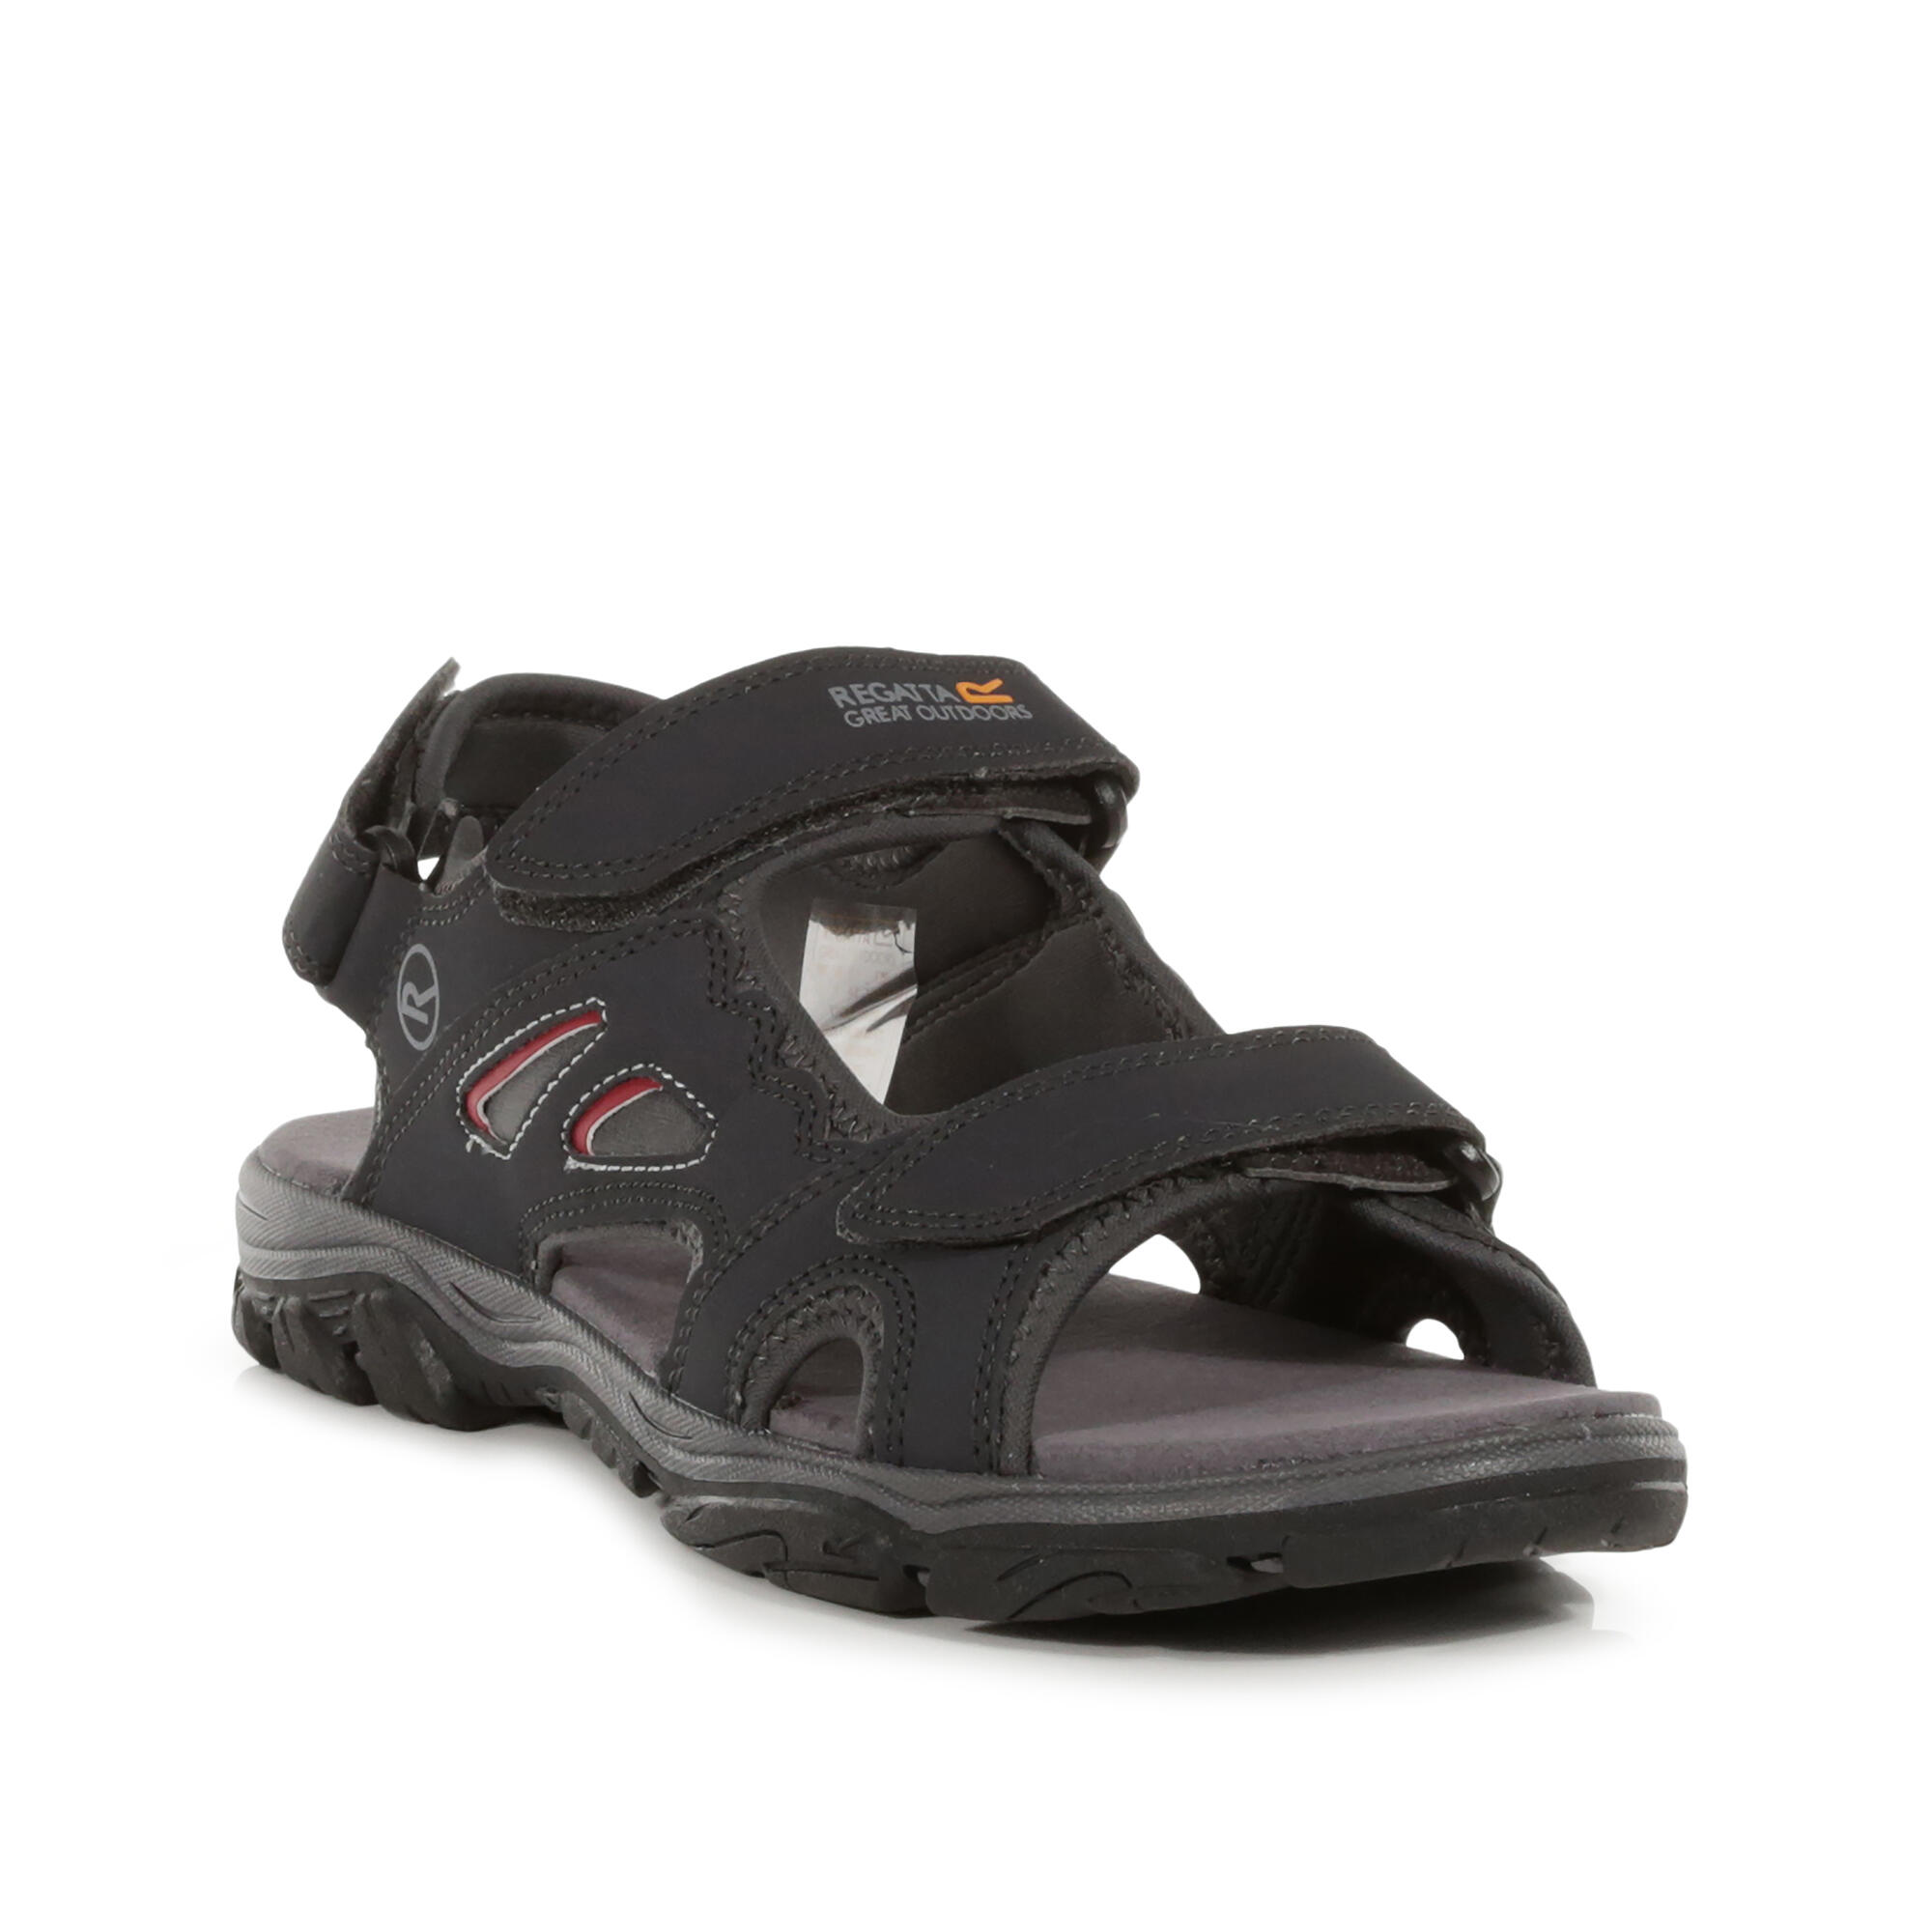 Holcombe Vent Men's Walking Sandals - Ash Rio Red 2/5